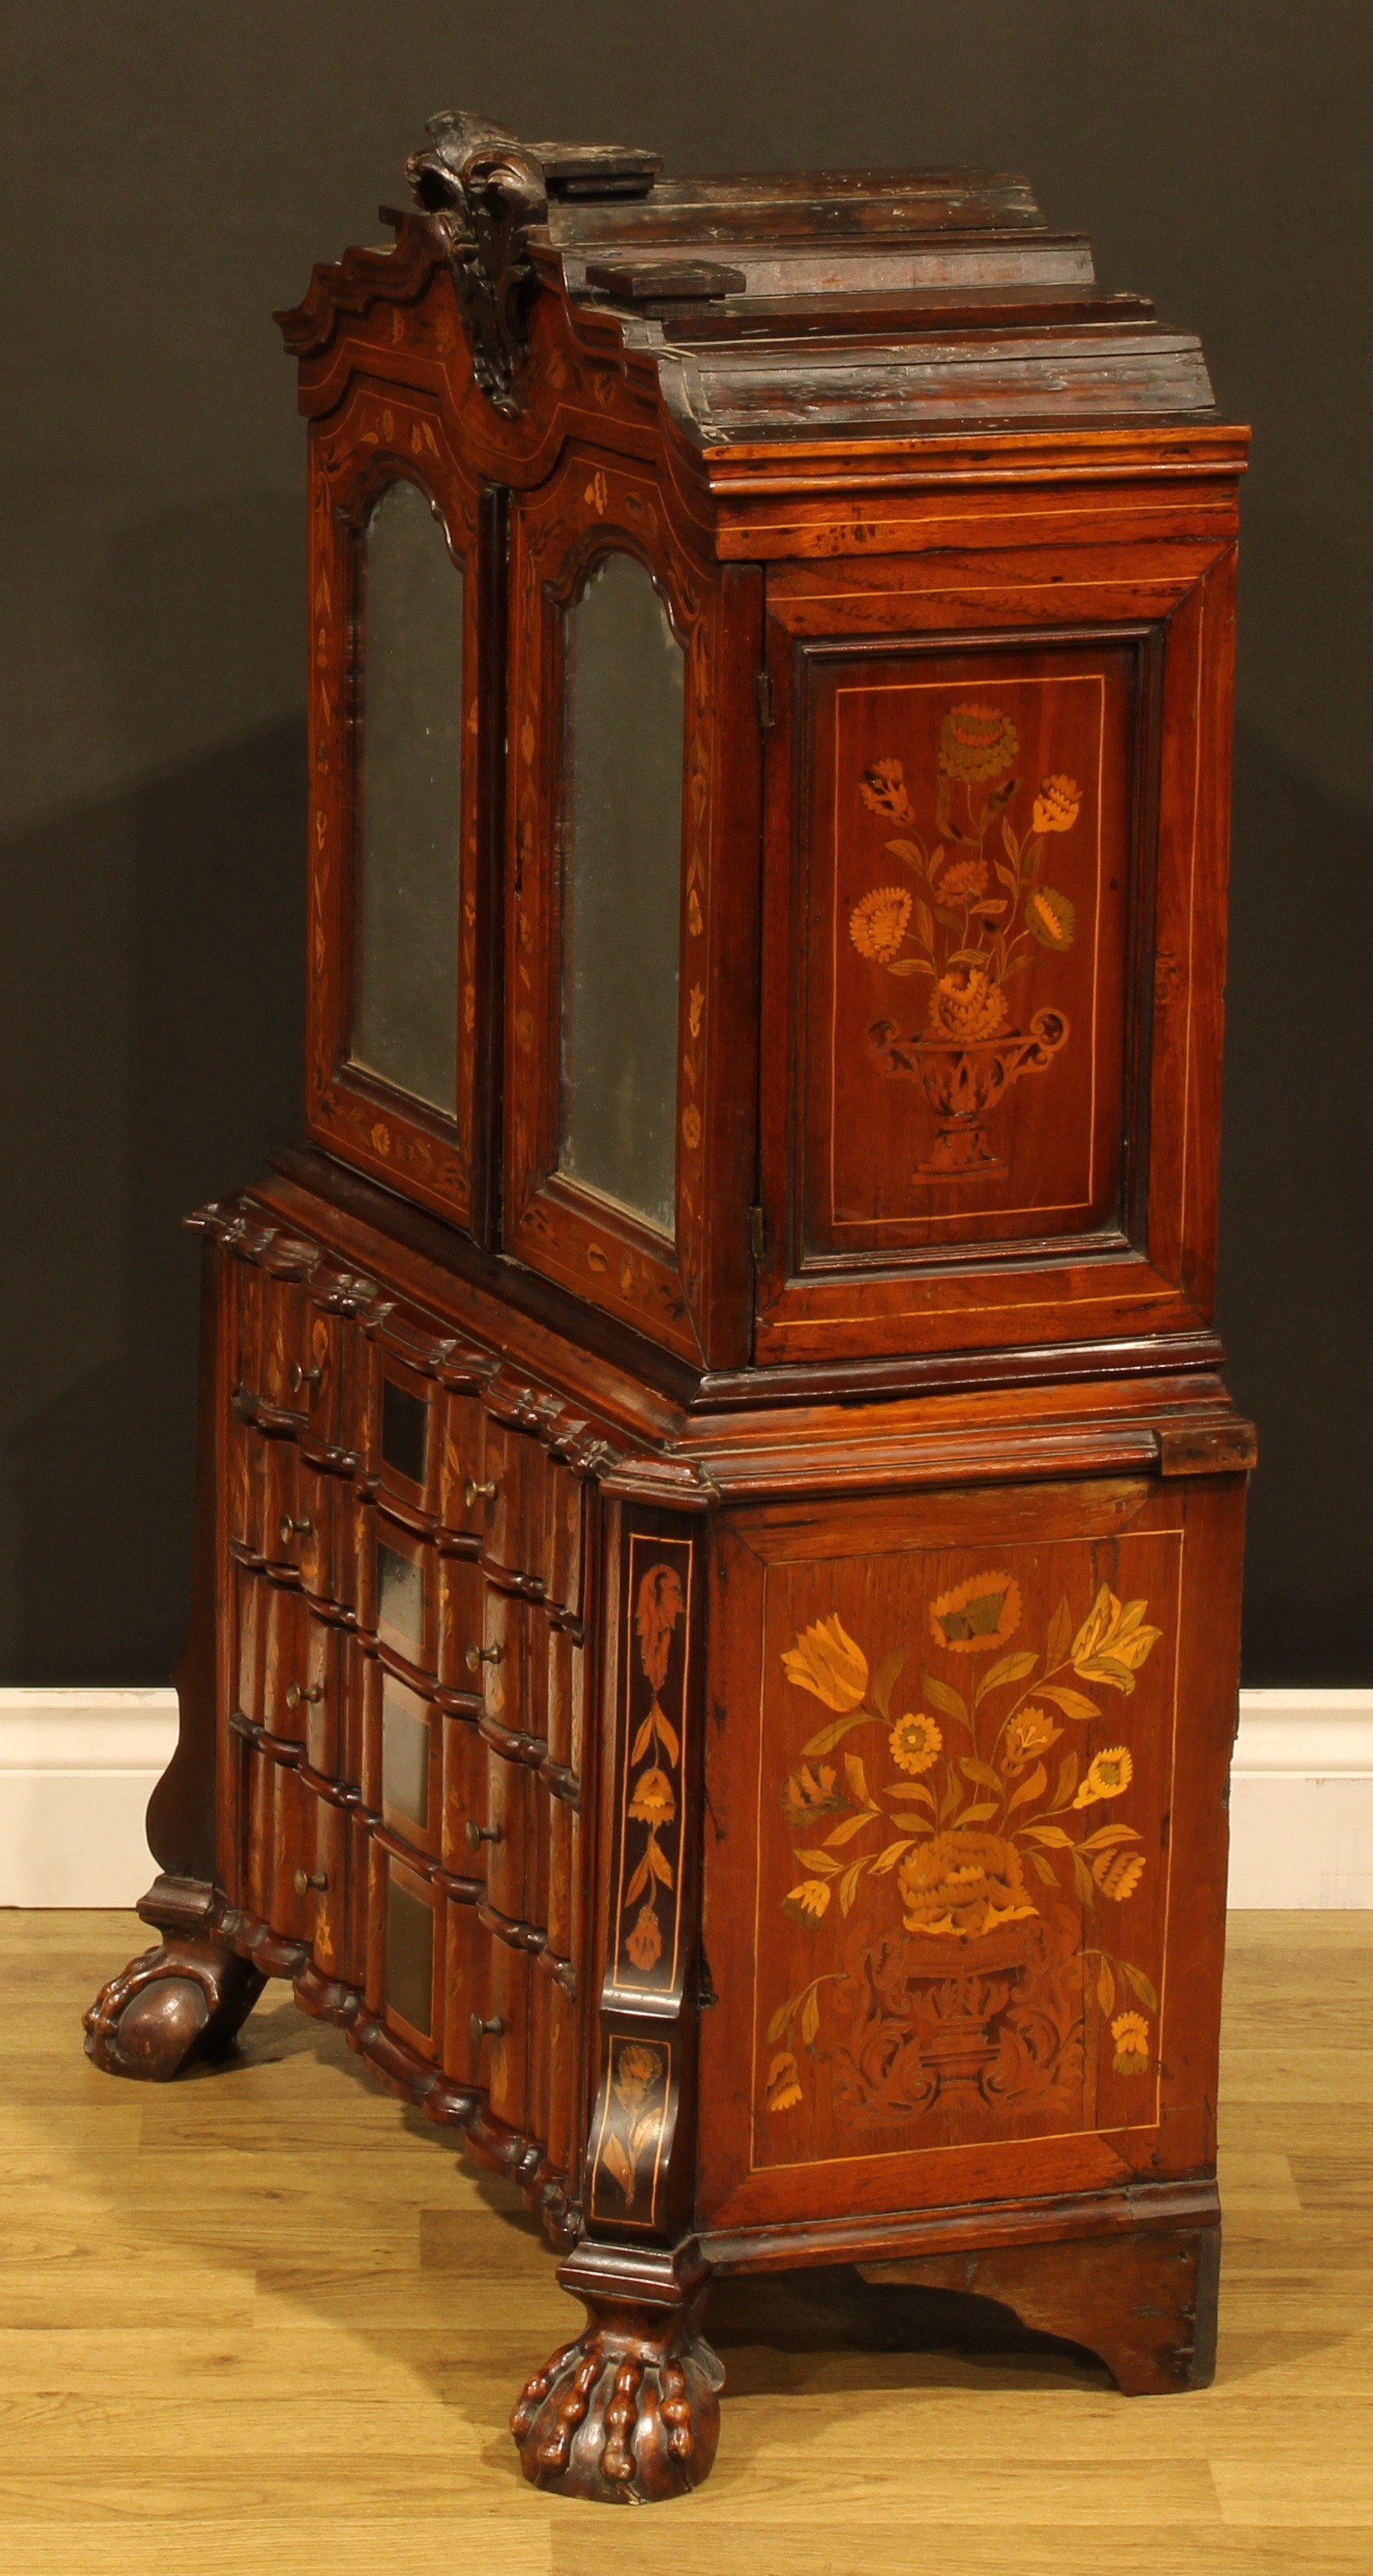 Miniature Furniture - an unusual 19th century Dutch marquetry arc-en-arbalète enclosed collector’s - Image 4 of 5